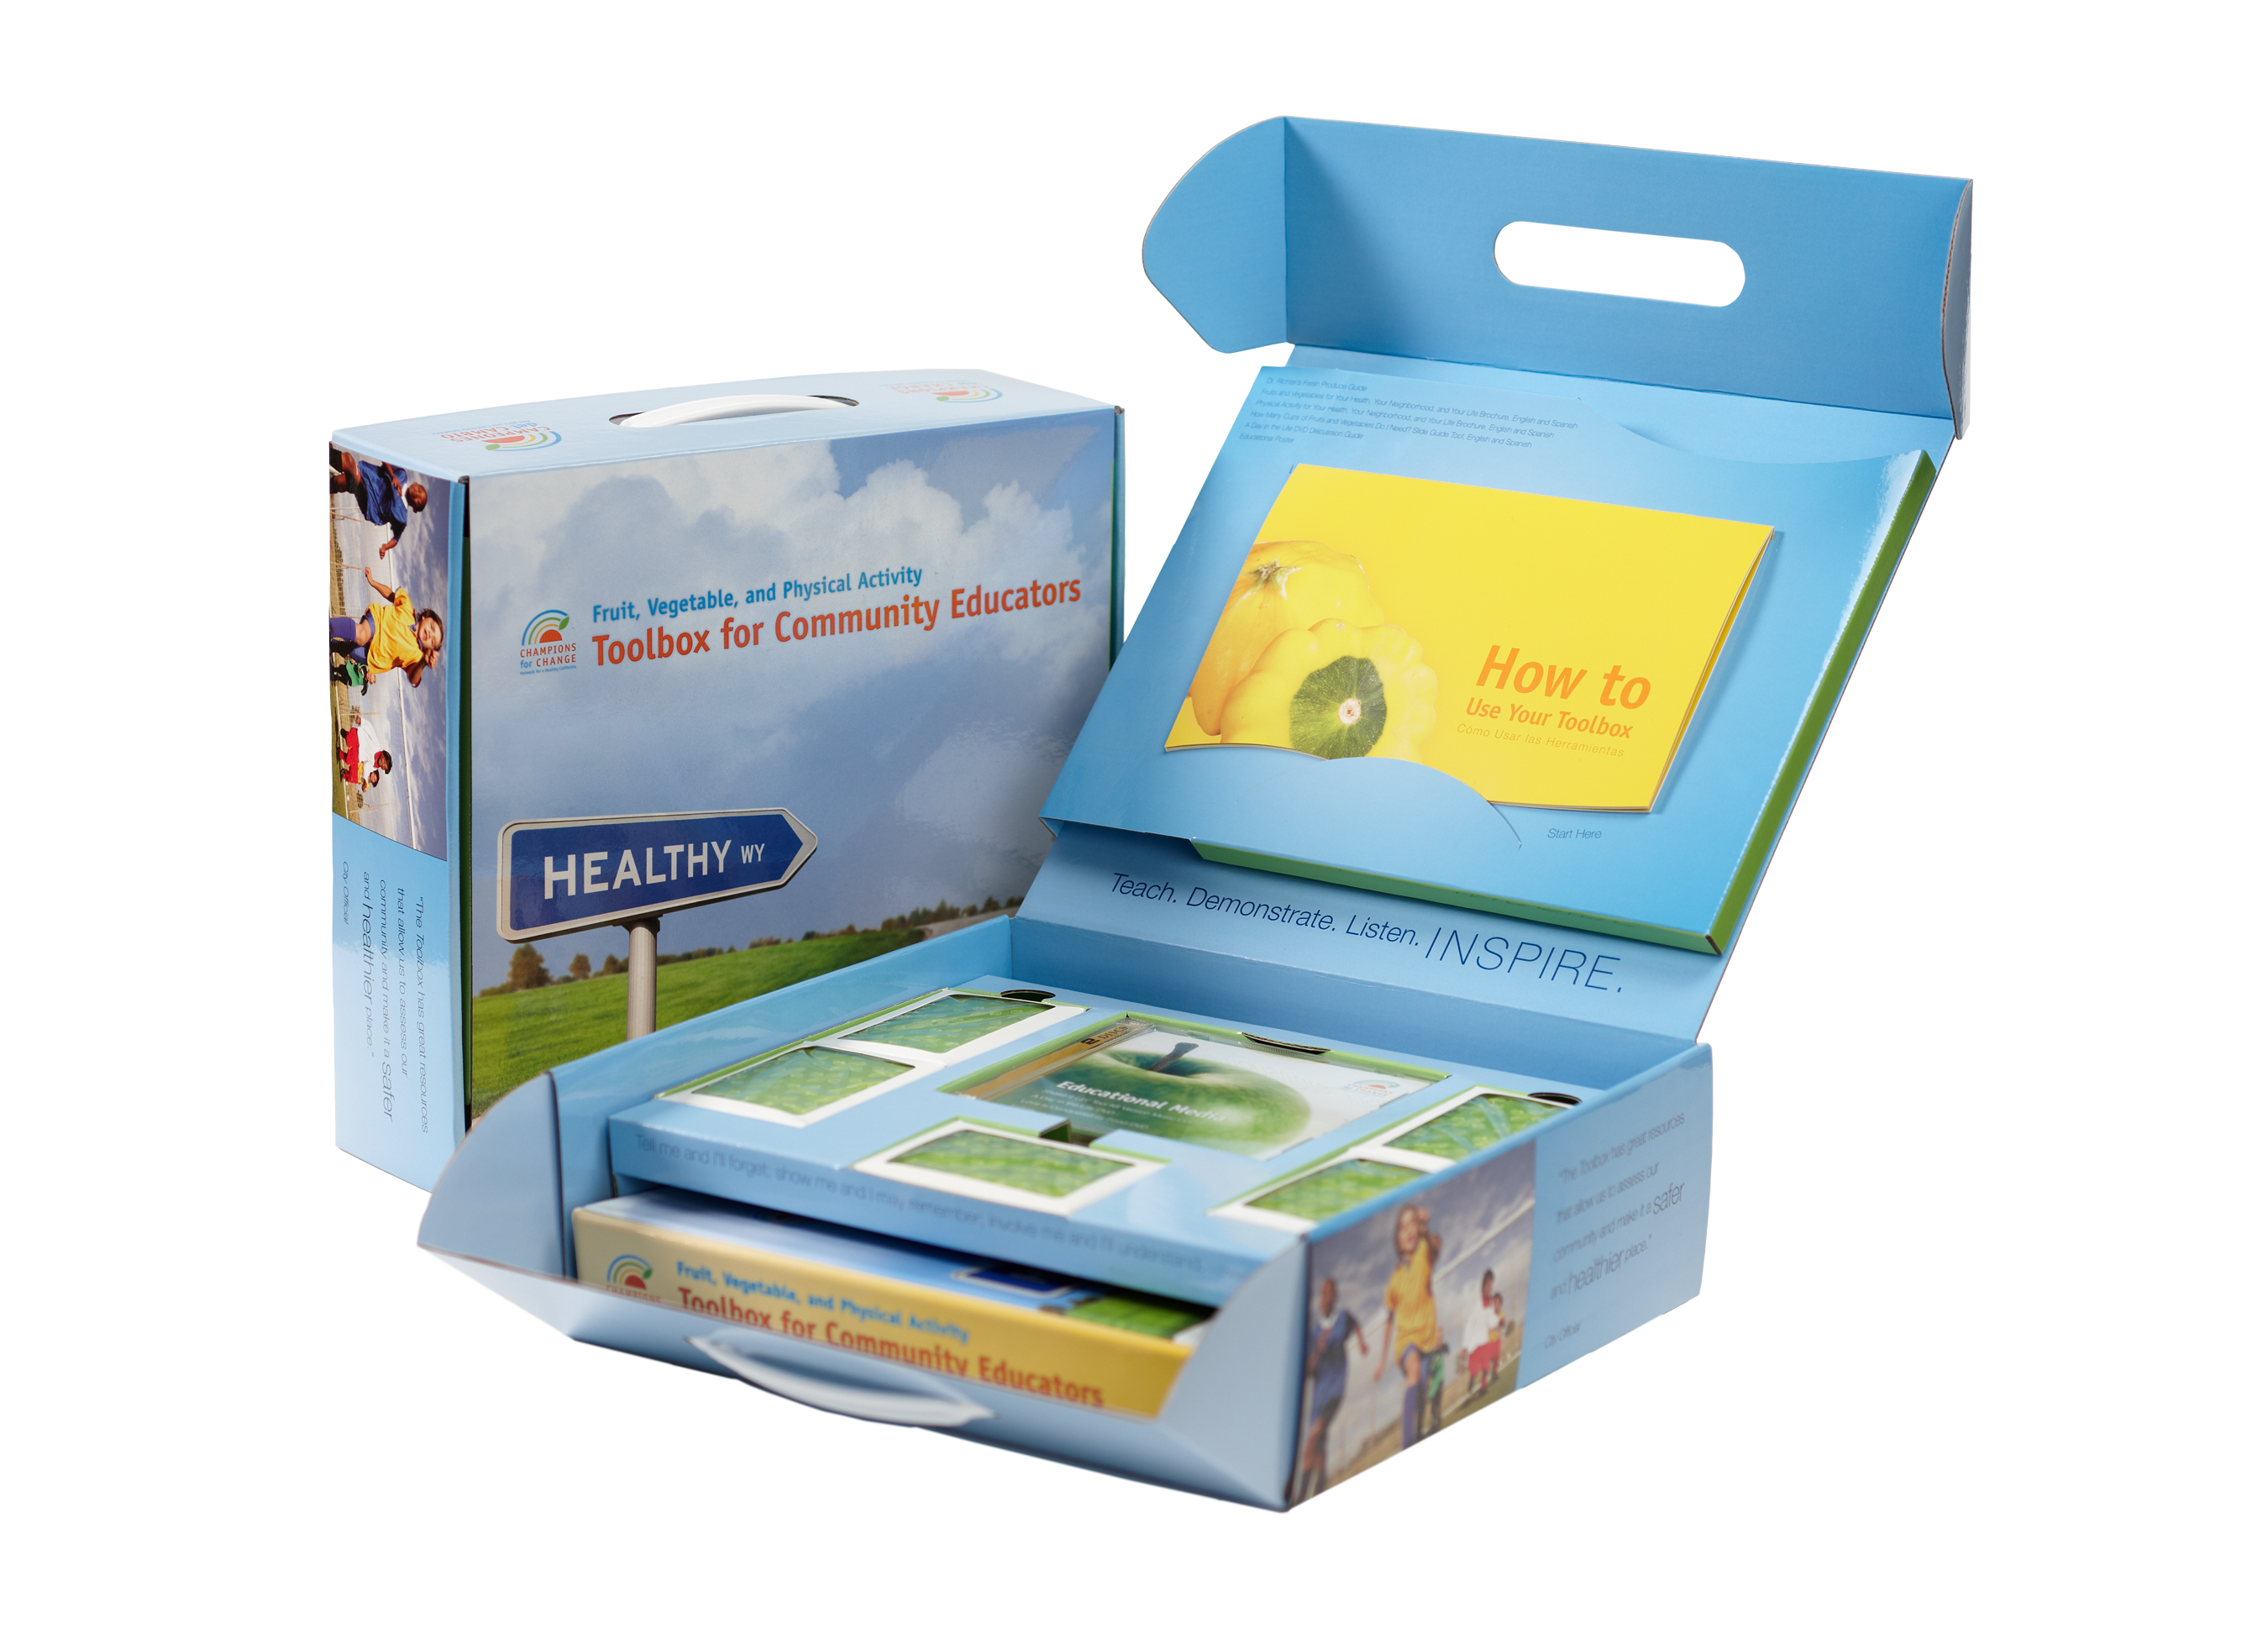 Print and box design for a 'Toolkit for Community Educators'. Its main colors are light blue, light green, and bright yellow.